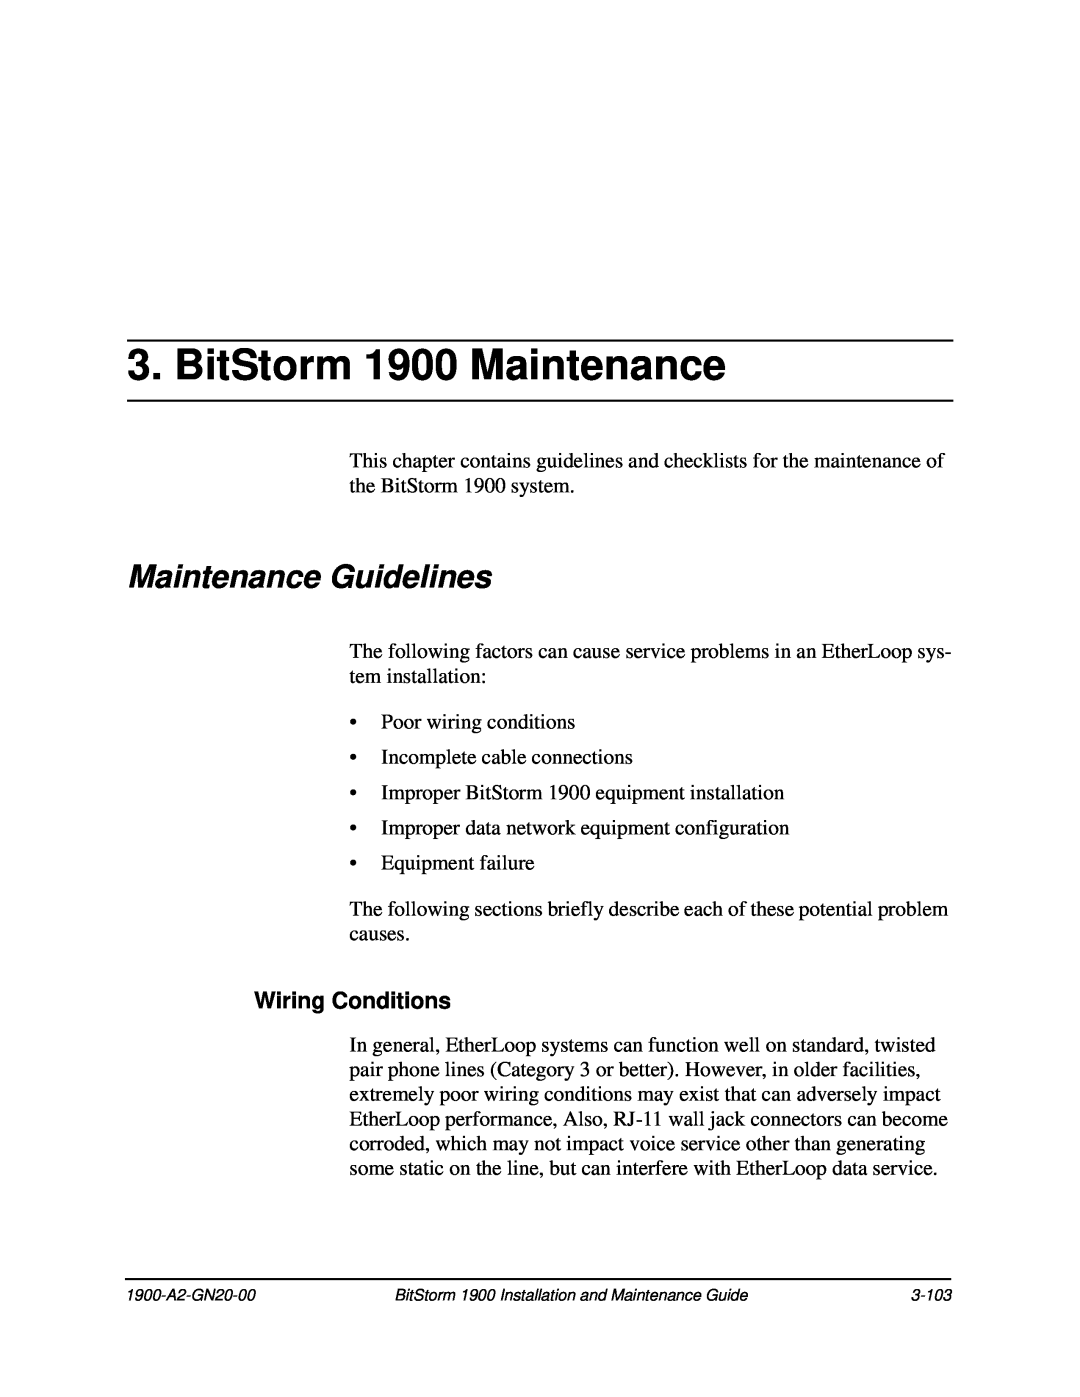 Paradyne manual BitStorm 1900 Maintenance, Maintenance Guidelines, Wiring Conditions 